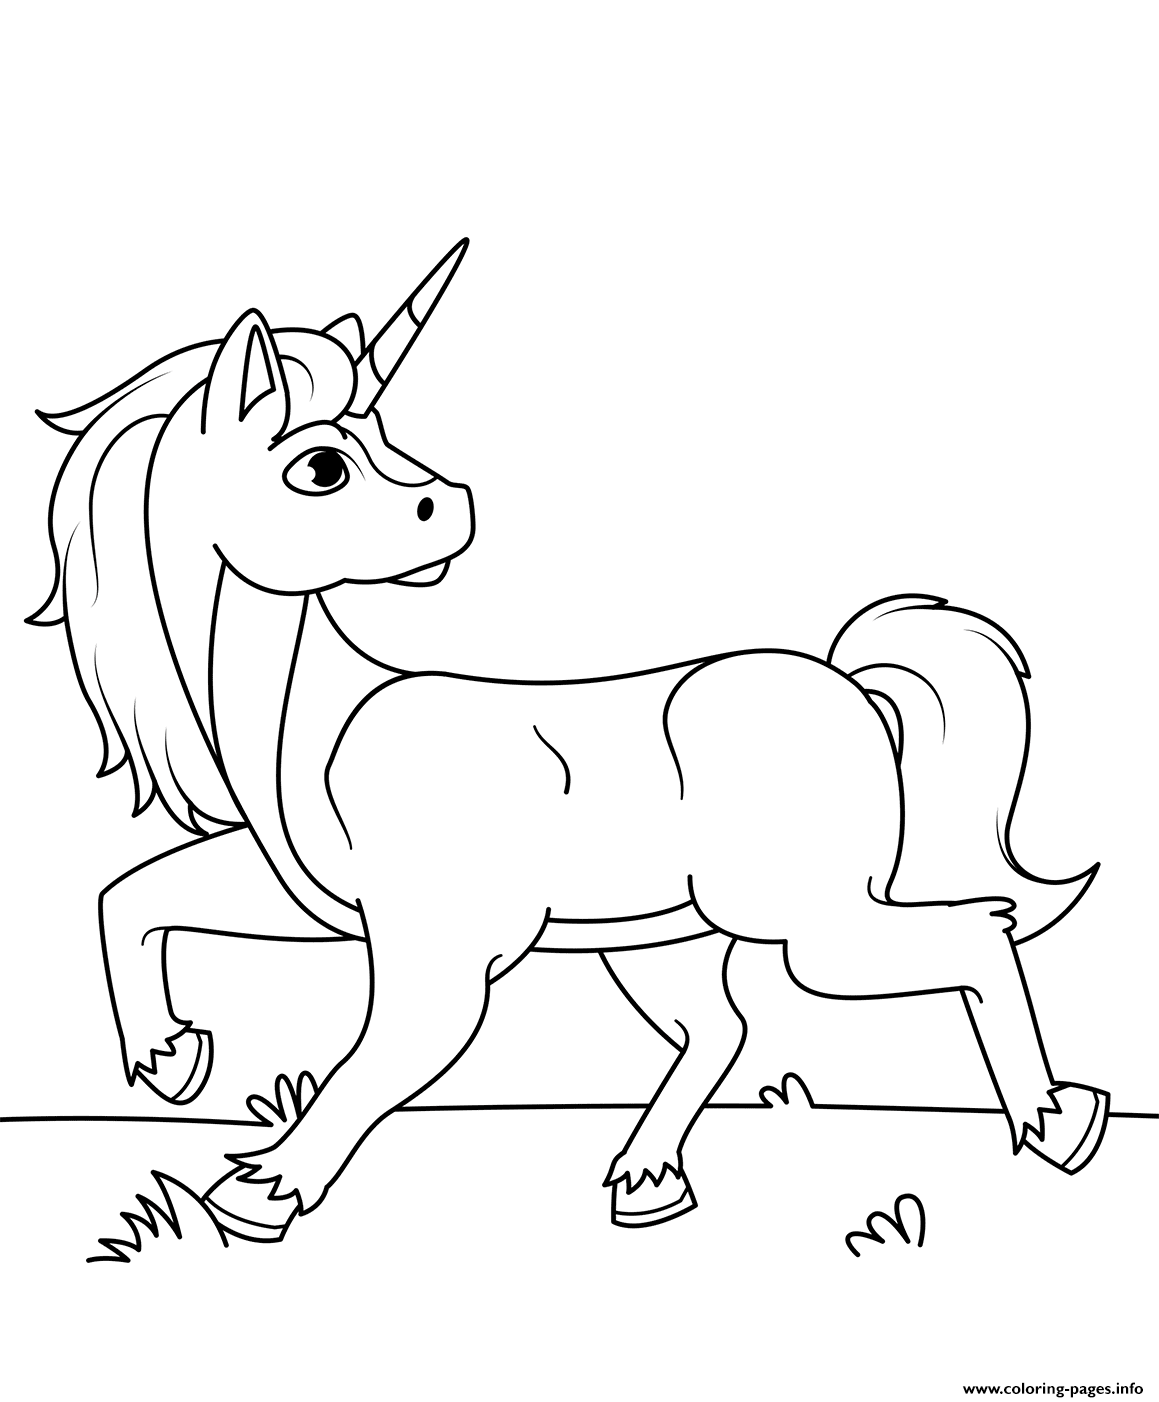 Young Unicorn Coloring Page coloring